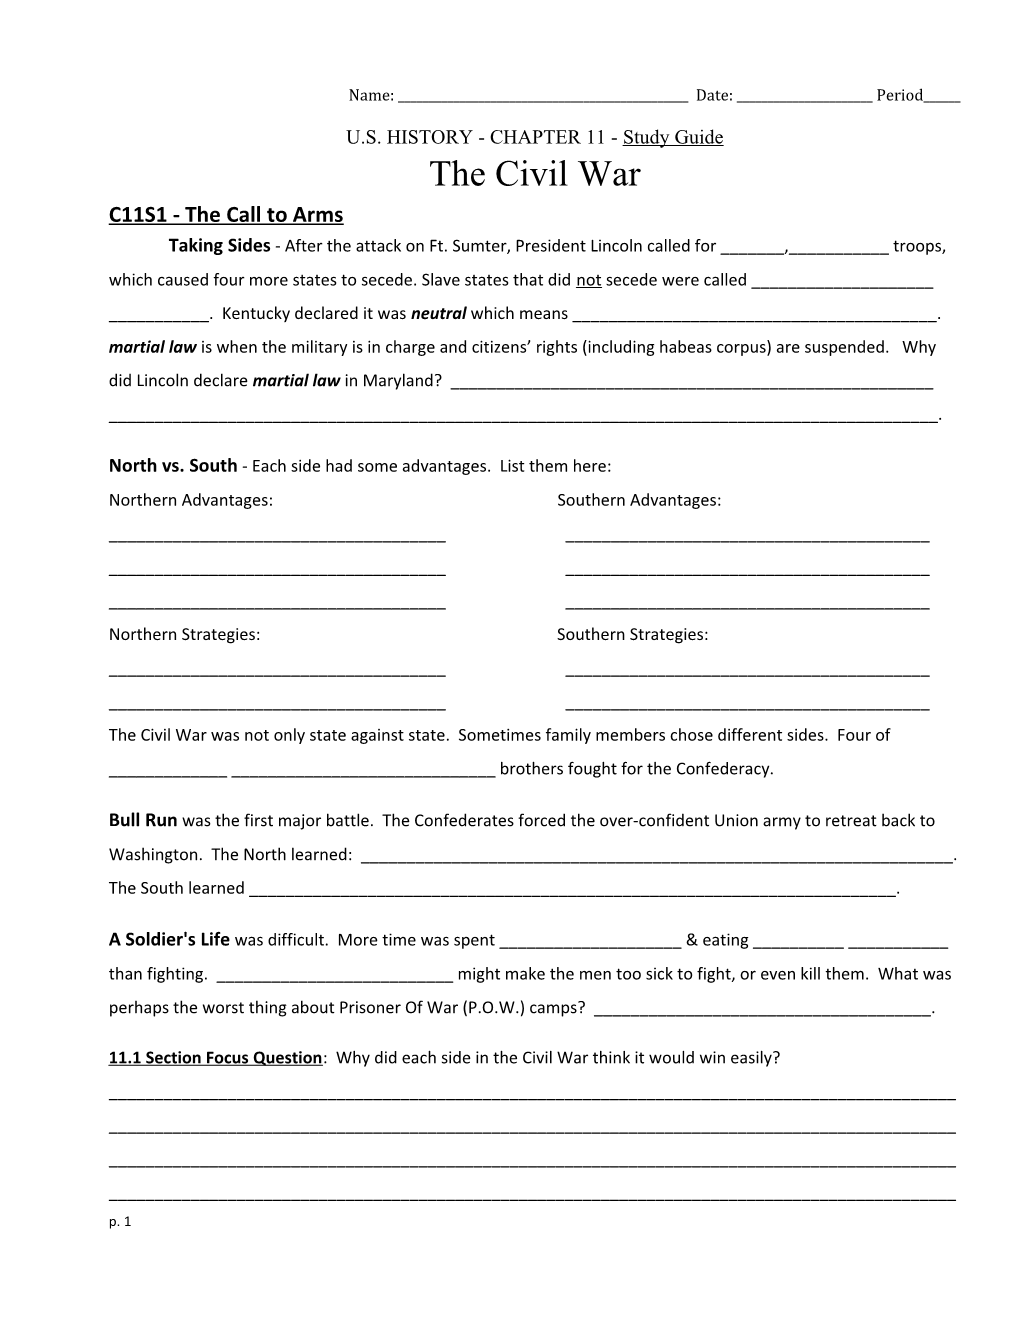 U.S. HISTORY - CHAPTER 11 - Study Guide